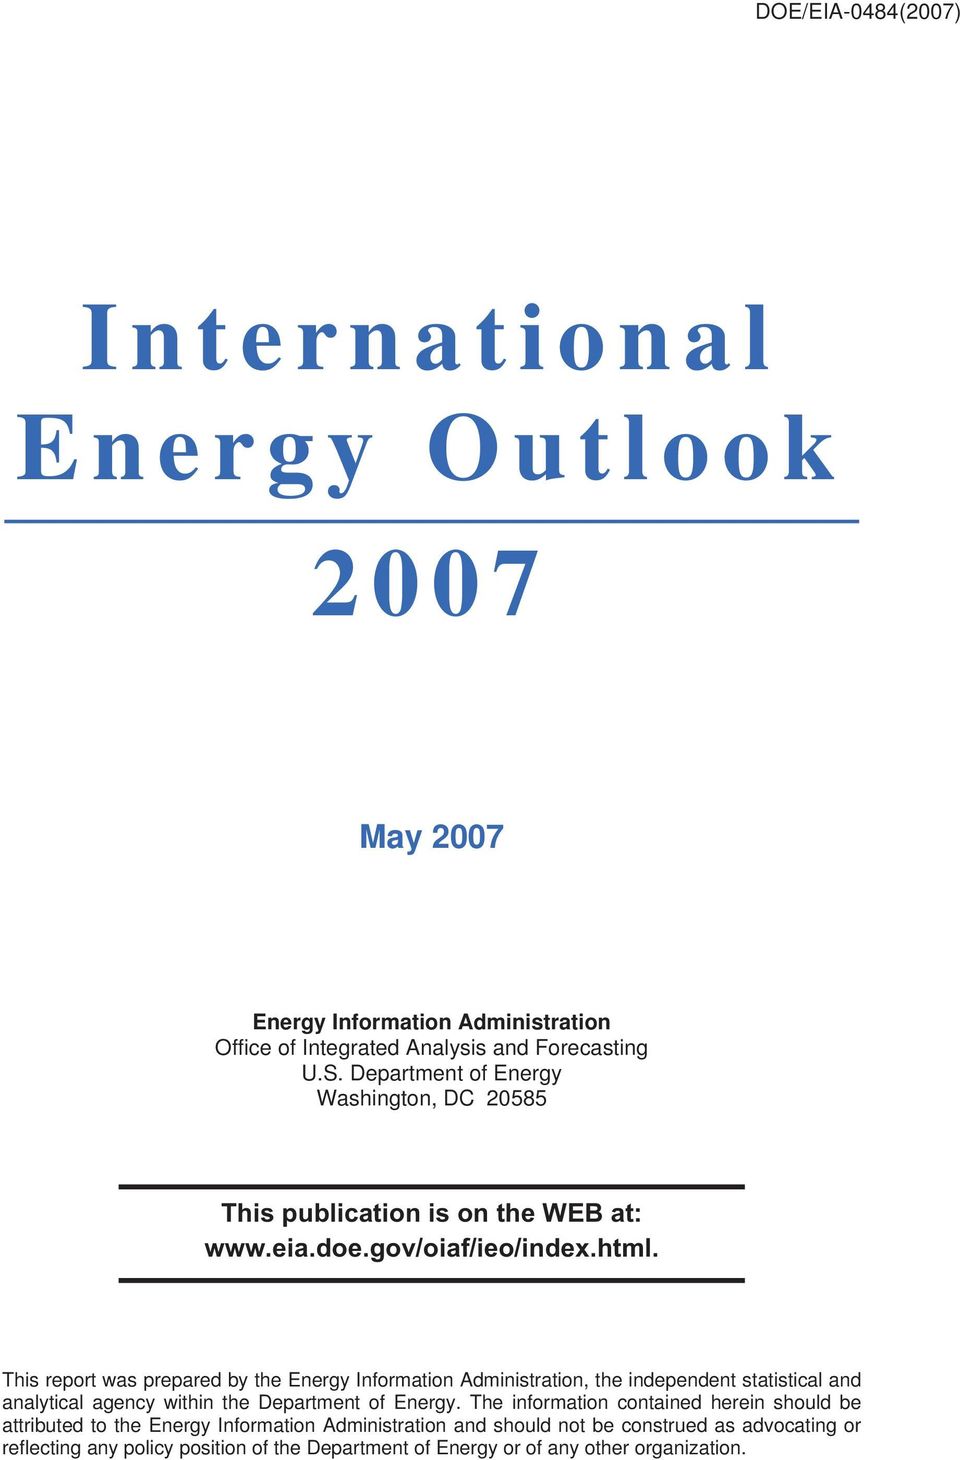 This report was prepared by the Energy Information Administration, the independent statistical and analytical agency within the Department of Energy.